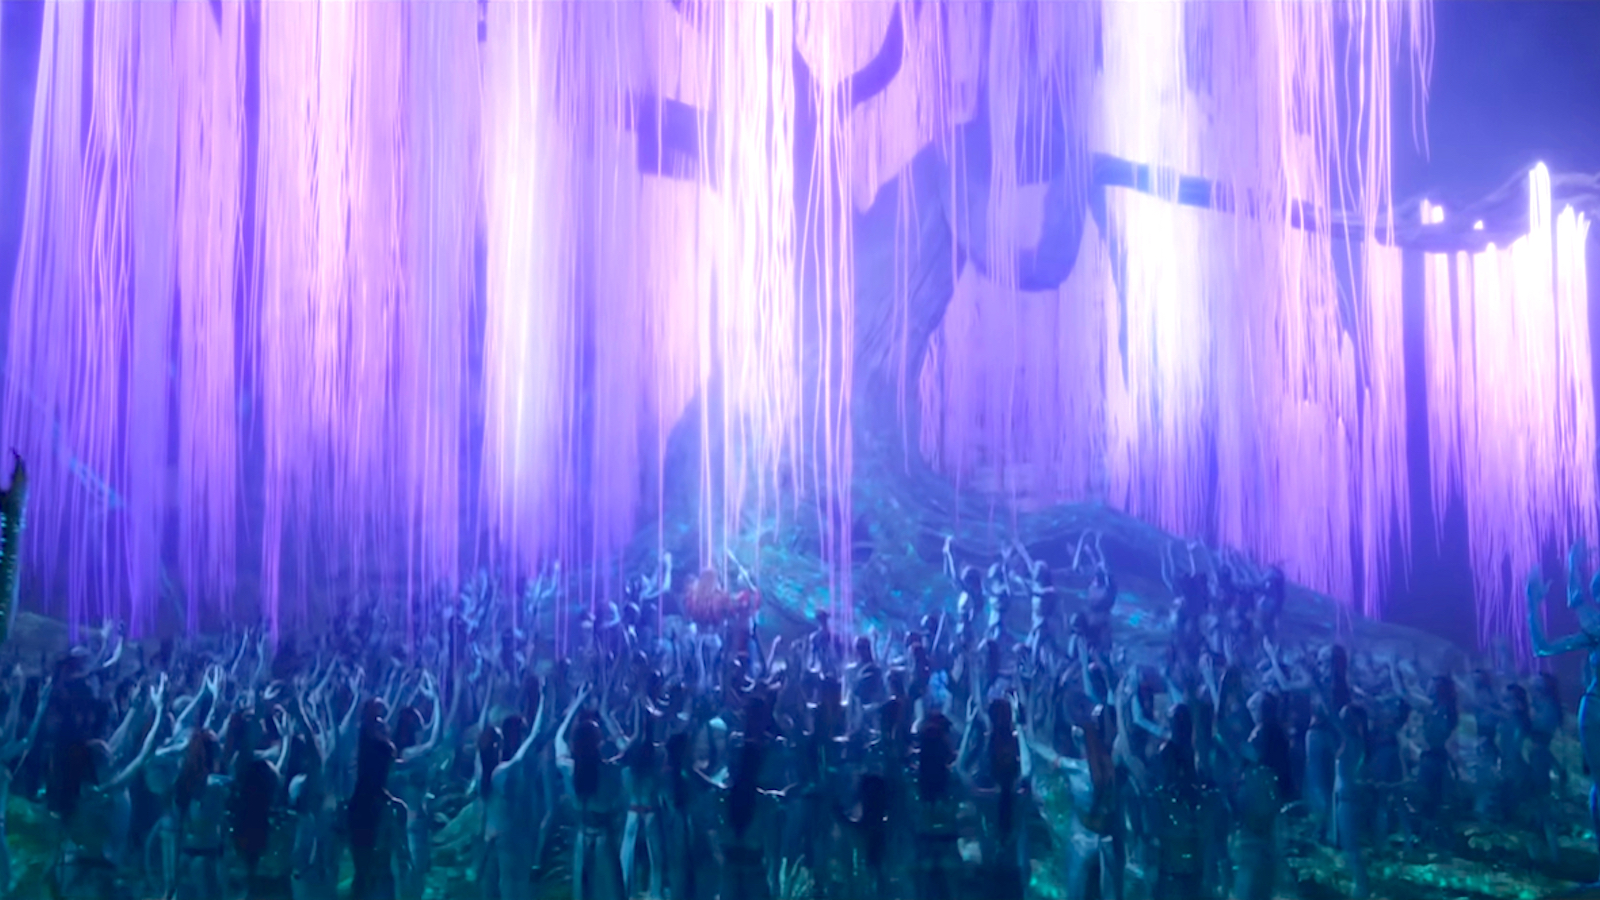 The Na’vi gathered around the Tree of Souls and connecting to Eywa